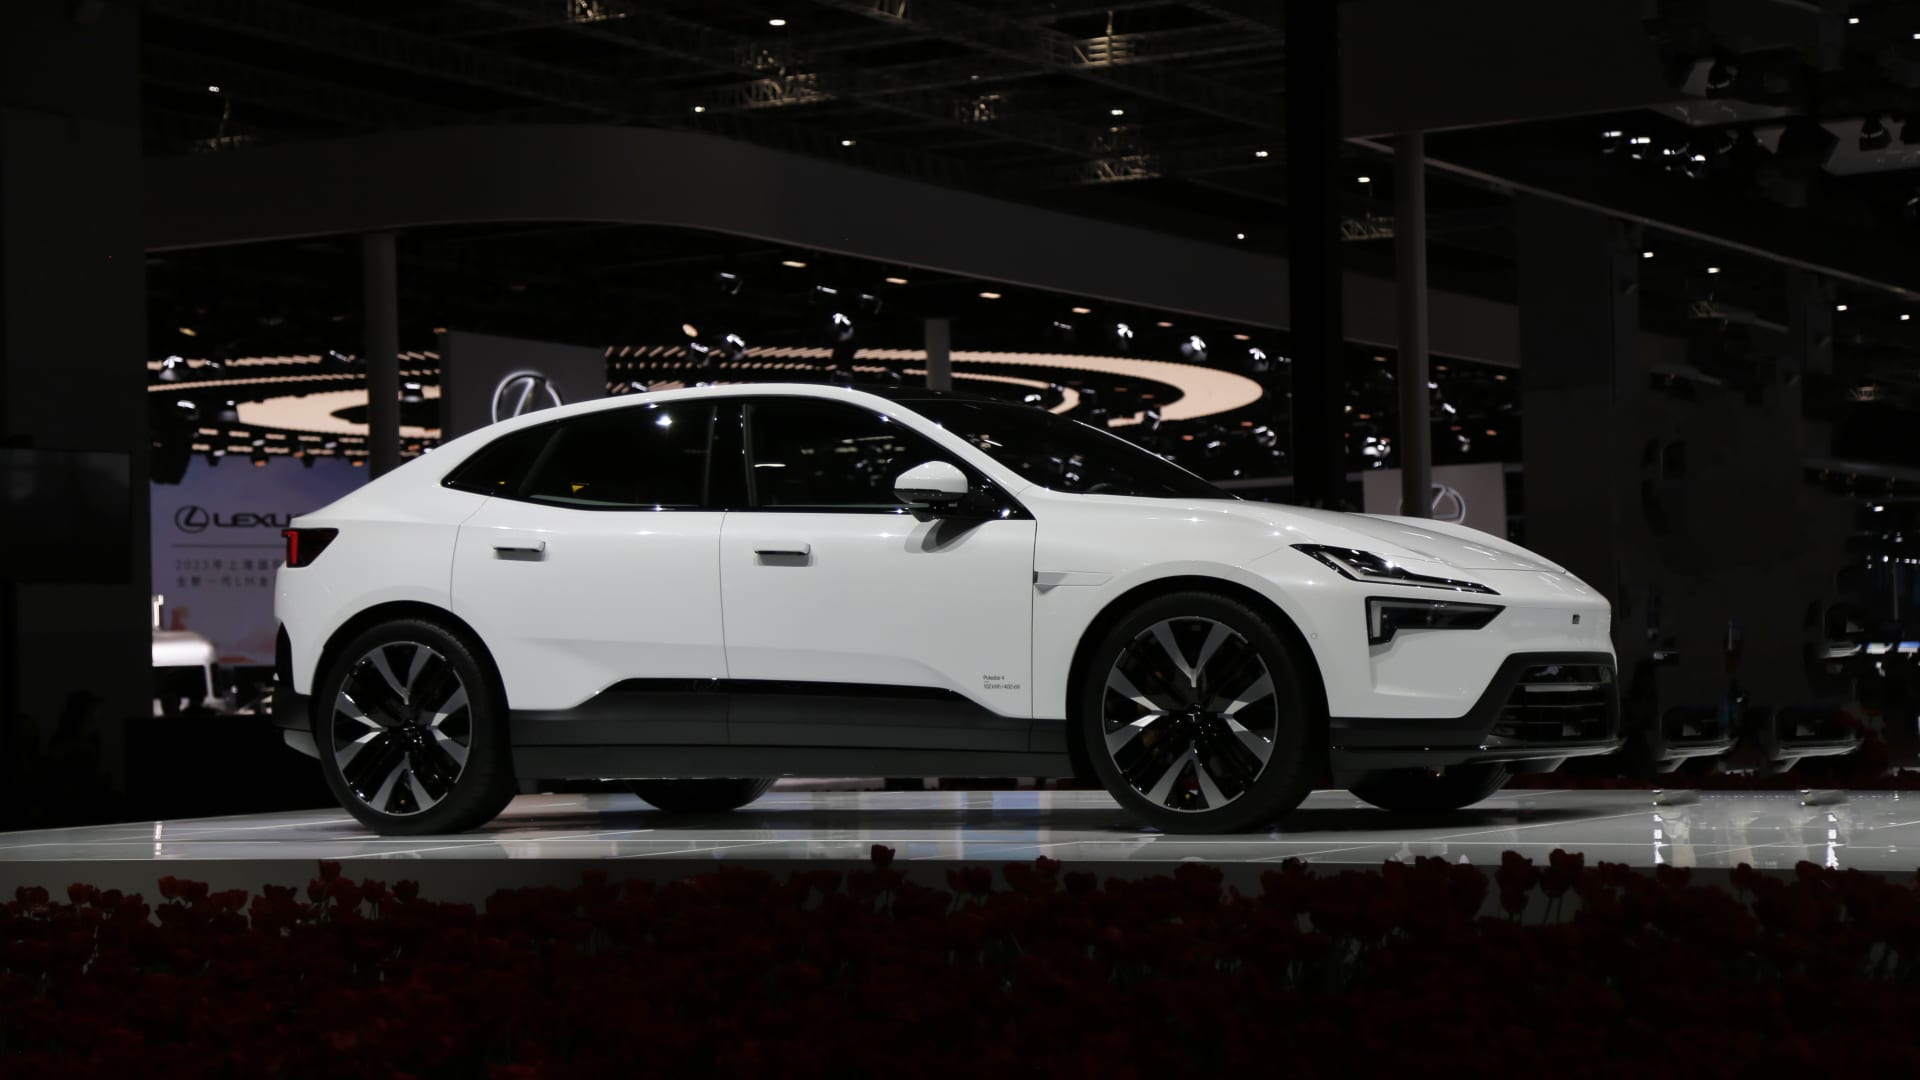 Tesla rival Polestar plans own smartphone launch alongside its first electric vehicle in China